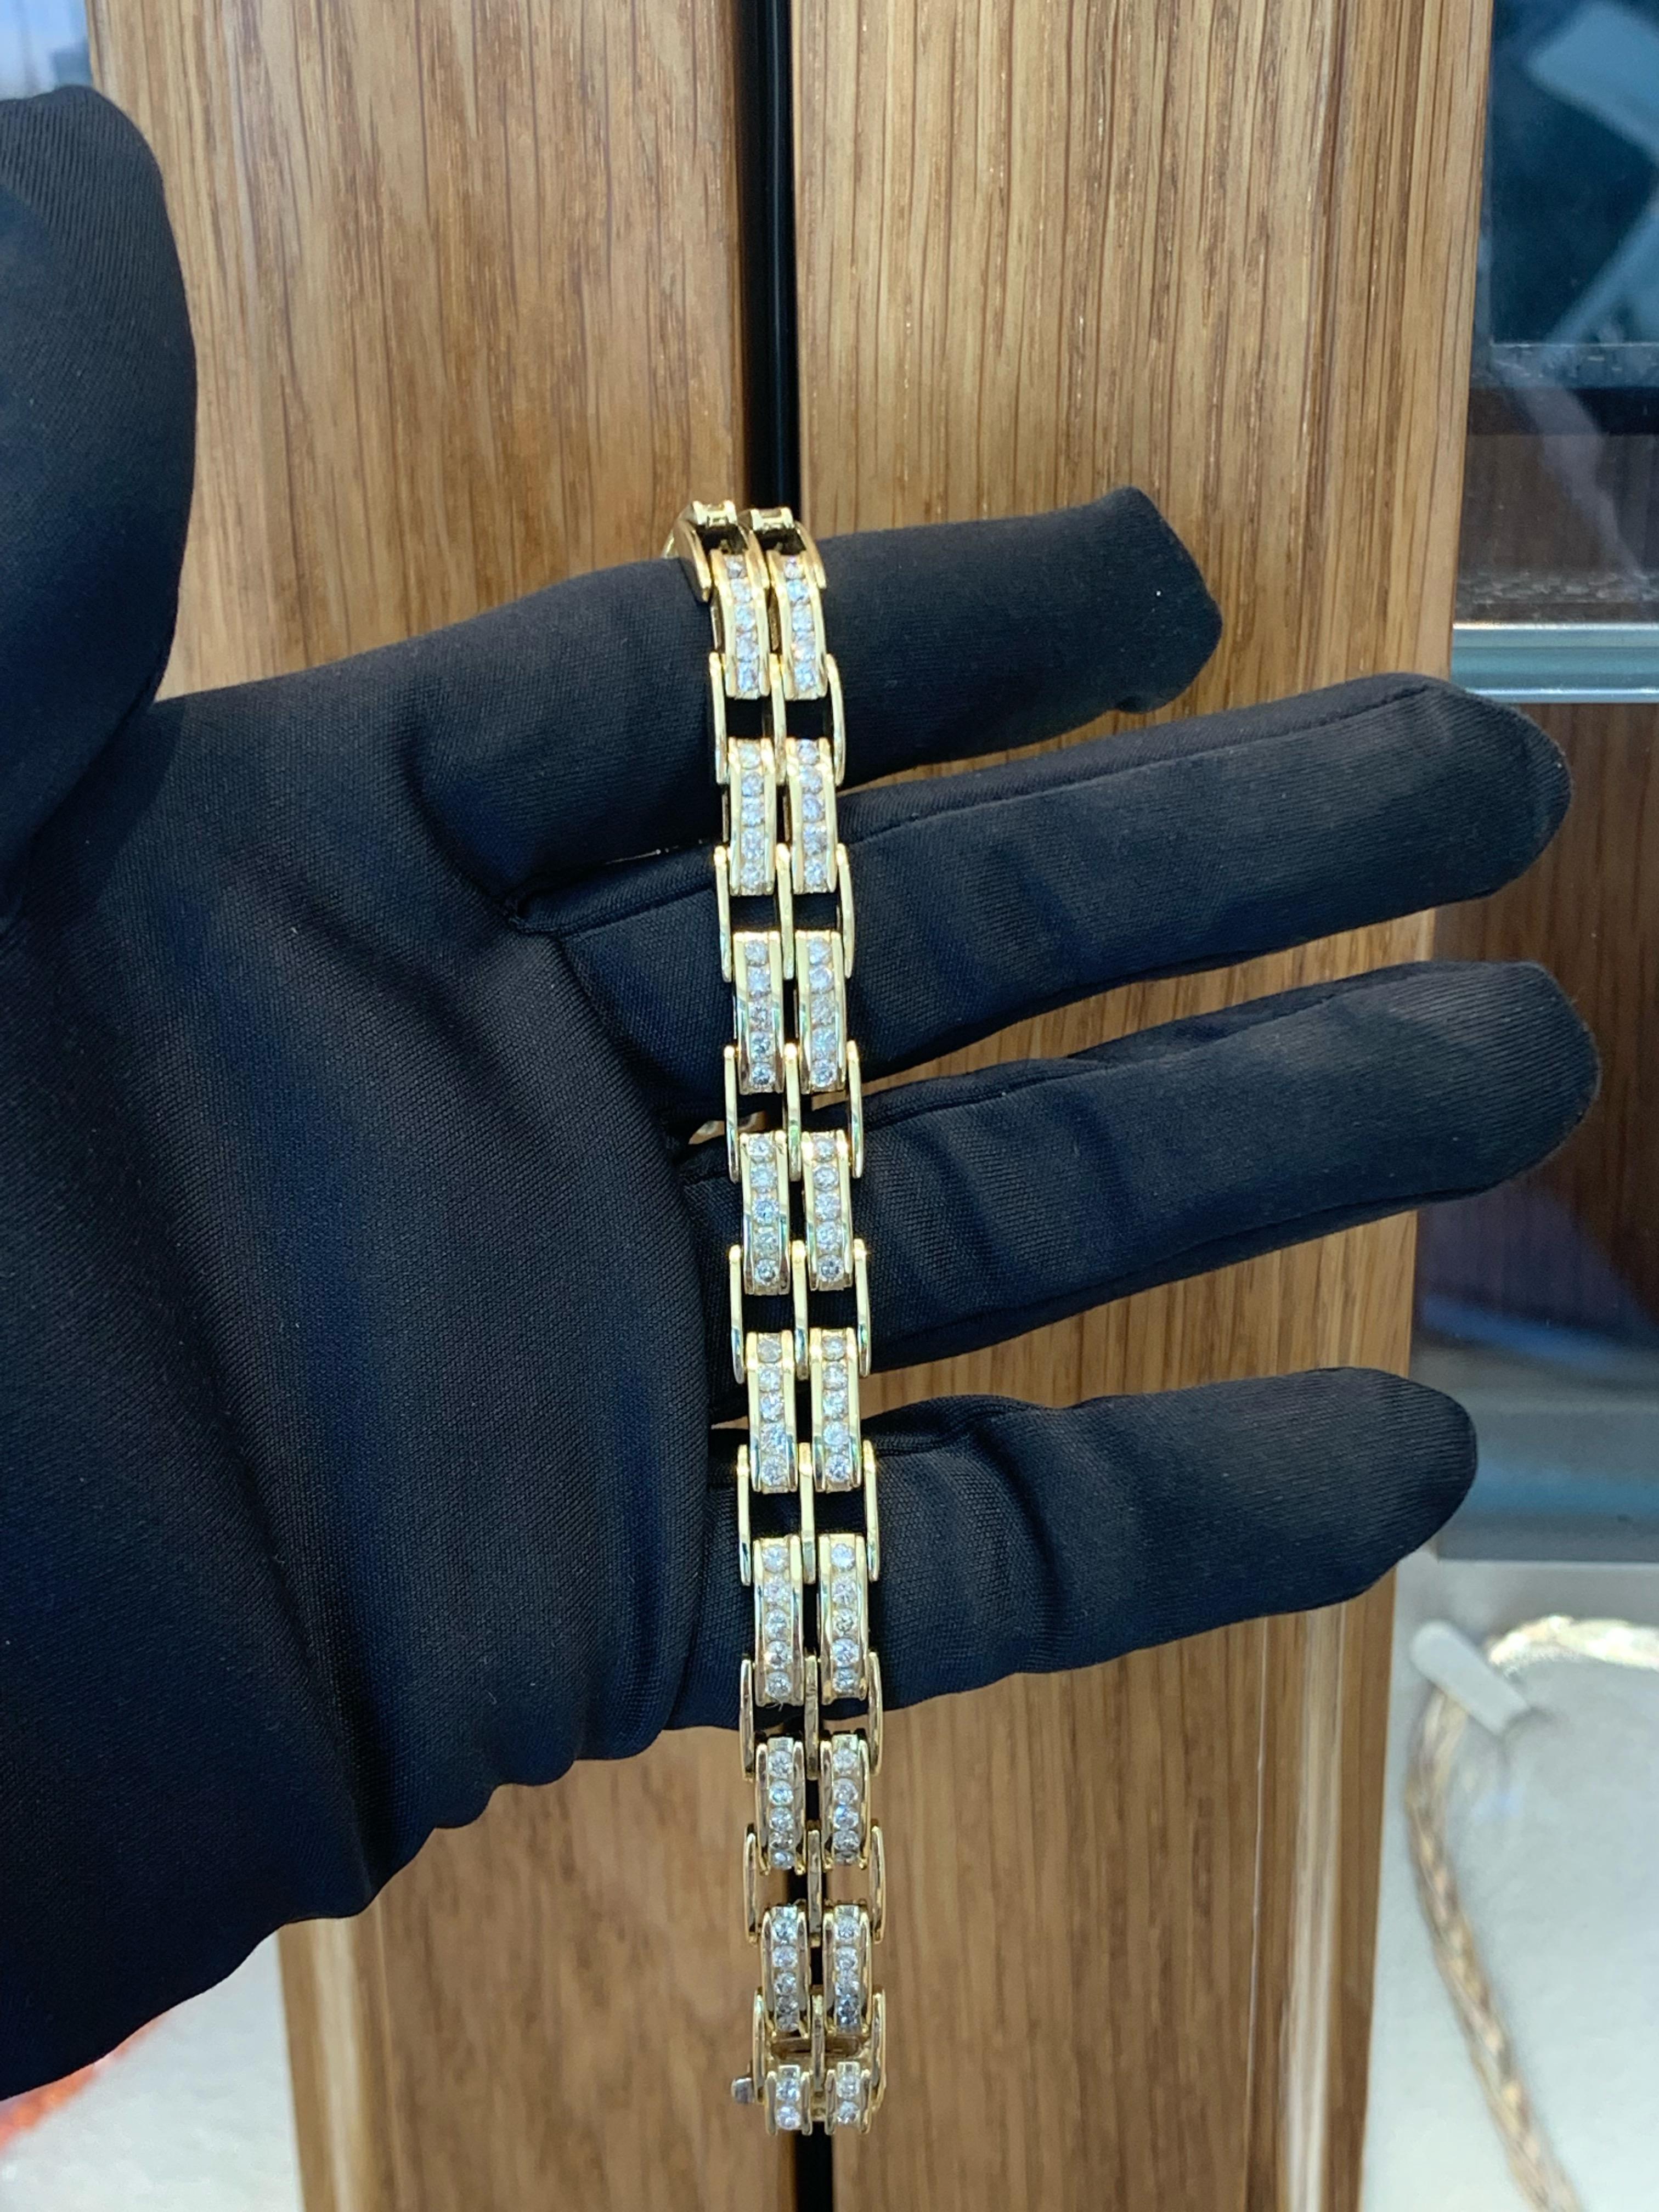 Beautifully Hand Crafted 14k Yellow Gold Double-Row Diamond Bracelet.
Amazing Shine, Incredible Craftsmanship.
Great Statement Piece.
Approximately 5.0 Carats Of Diamonds.
Nice & Clean Stones. Very Well Matched.
Comfortable Fit On The